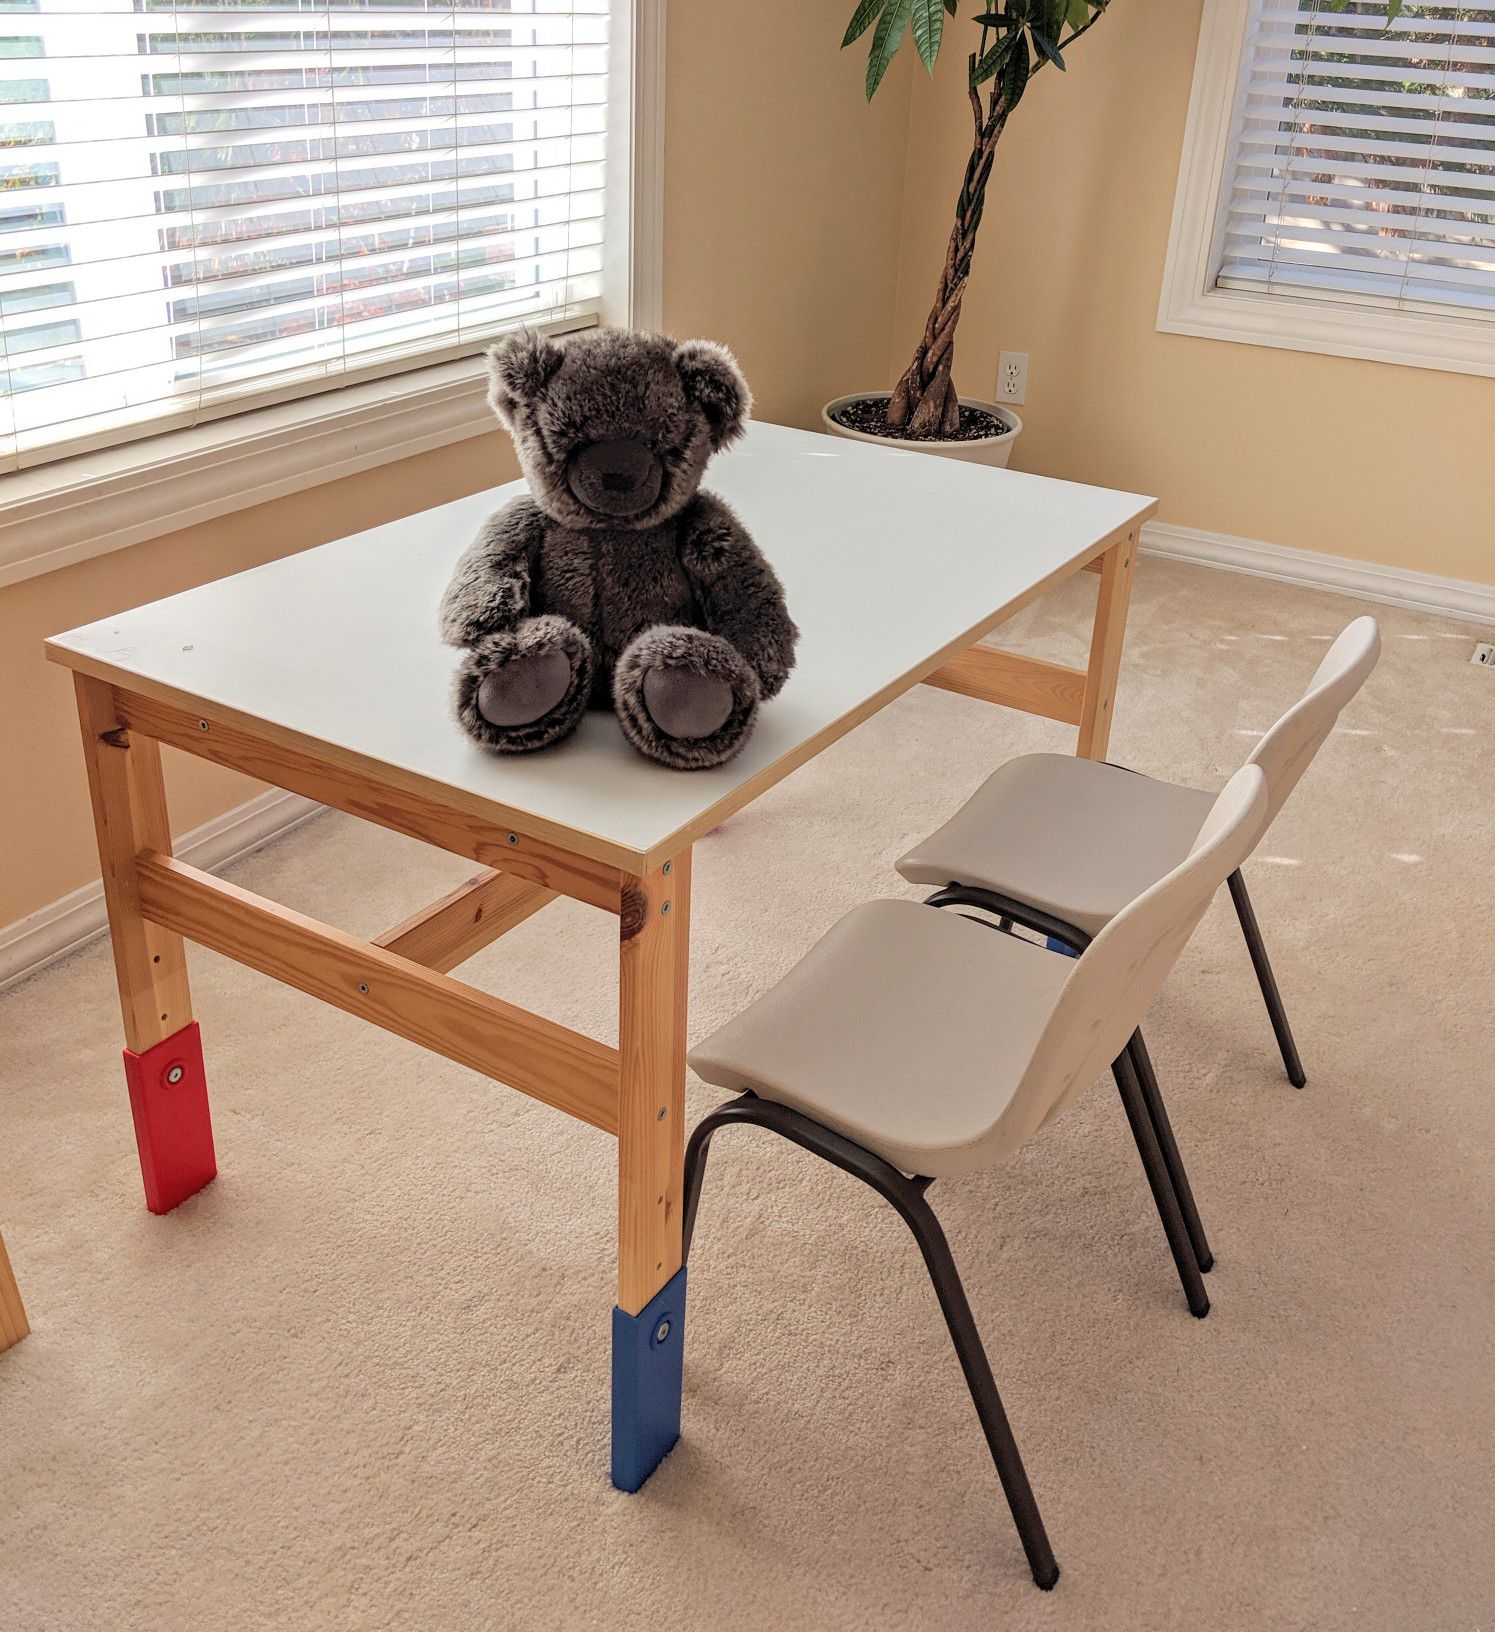 Kids table and chairs, adjustable height